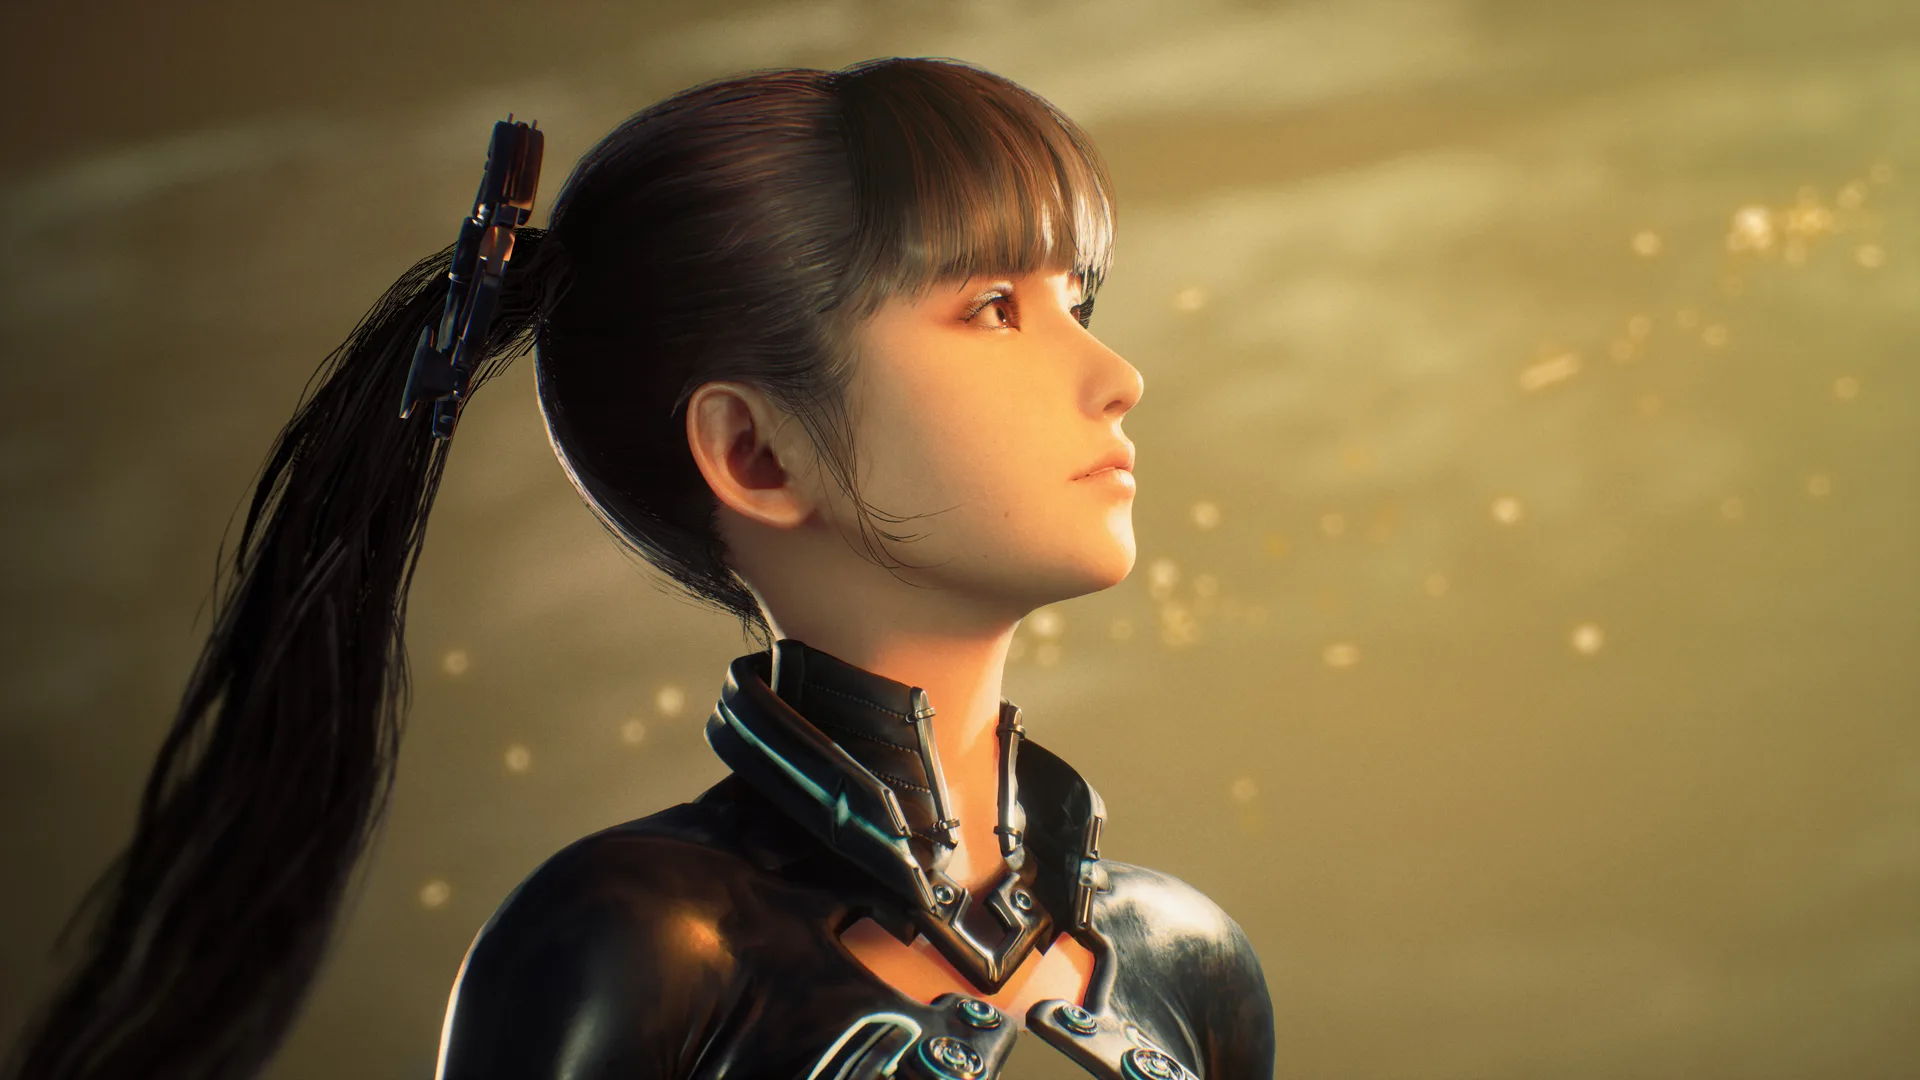 Eve, the heroine of Stellar Blade, is seen in profile, looking to the right at something off-screen